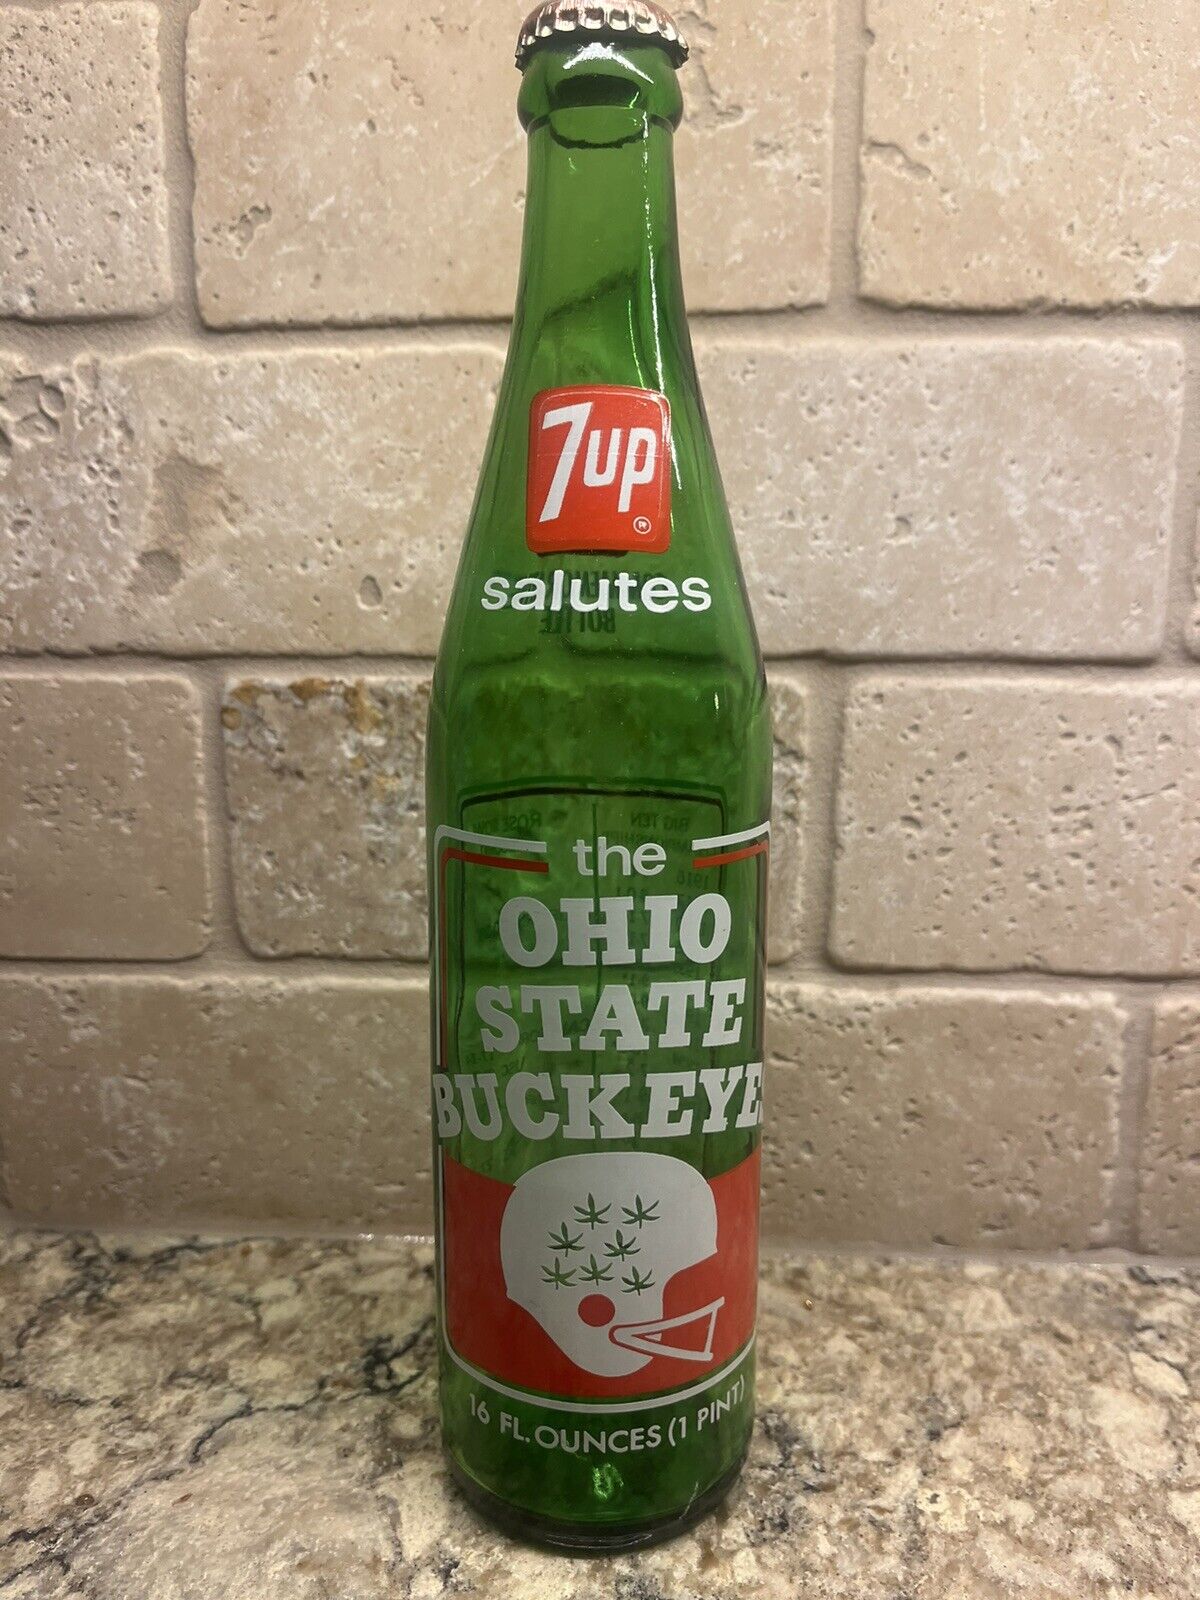 Vintage The Ohio State Buckeyes Green 7 Up Bottle Empty 1973 Salutes